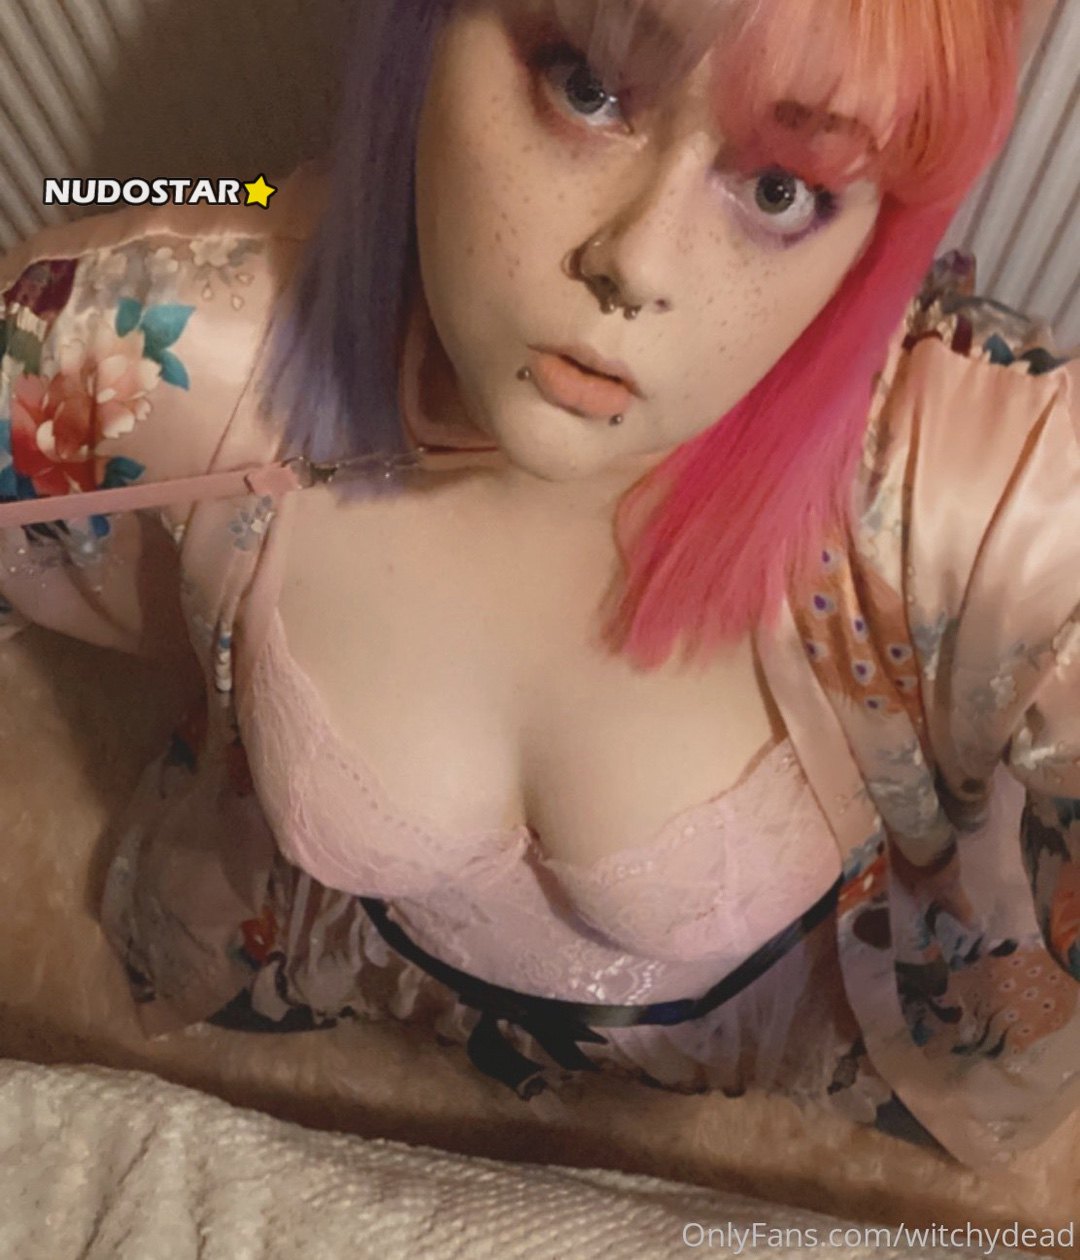 WitchyDead Onlyfans Nudes Leaks (341 photos + 6 videos)